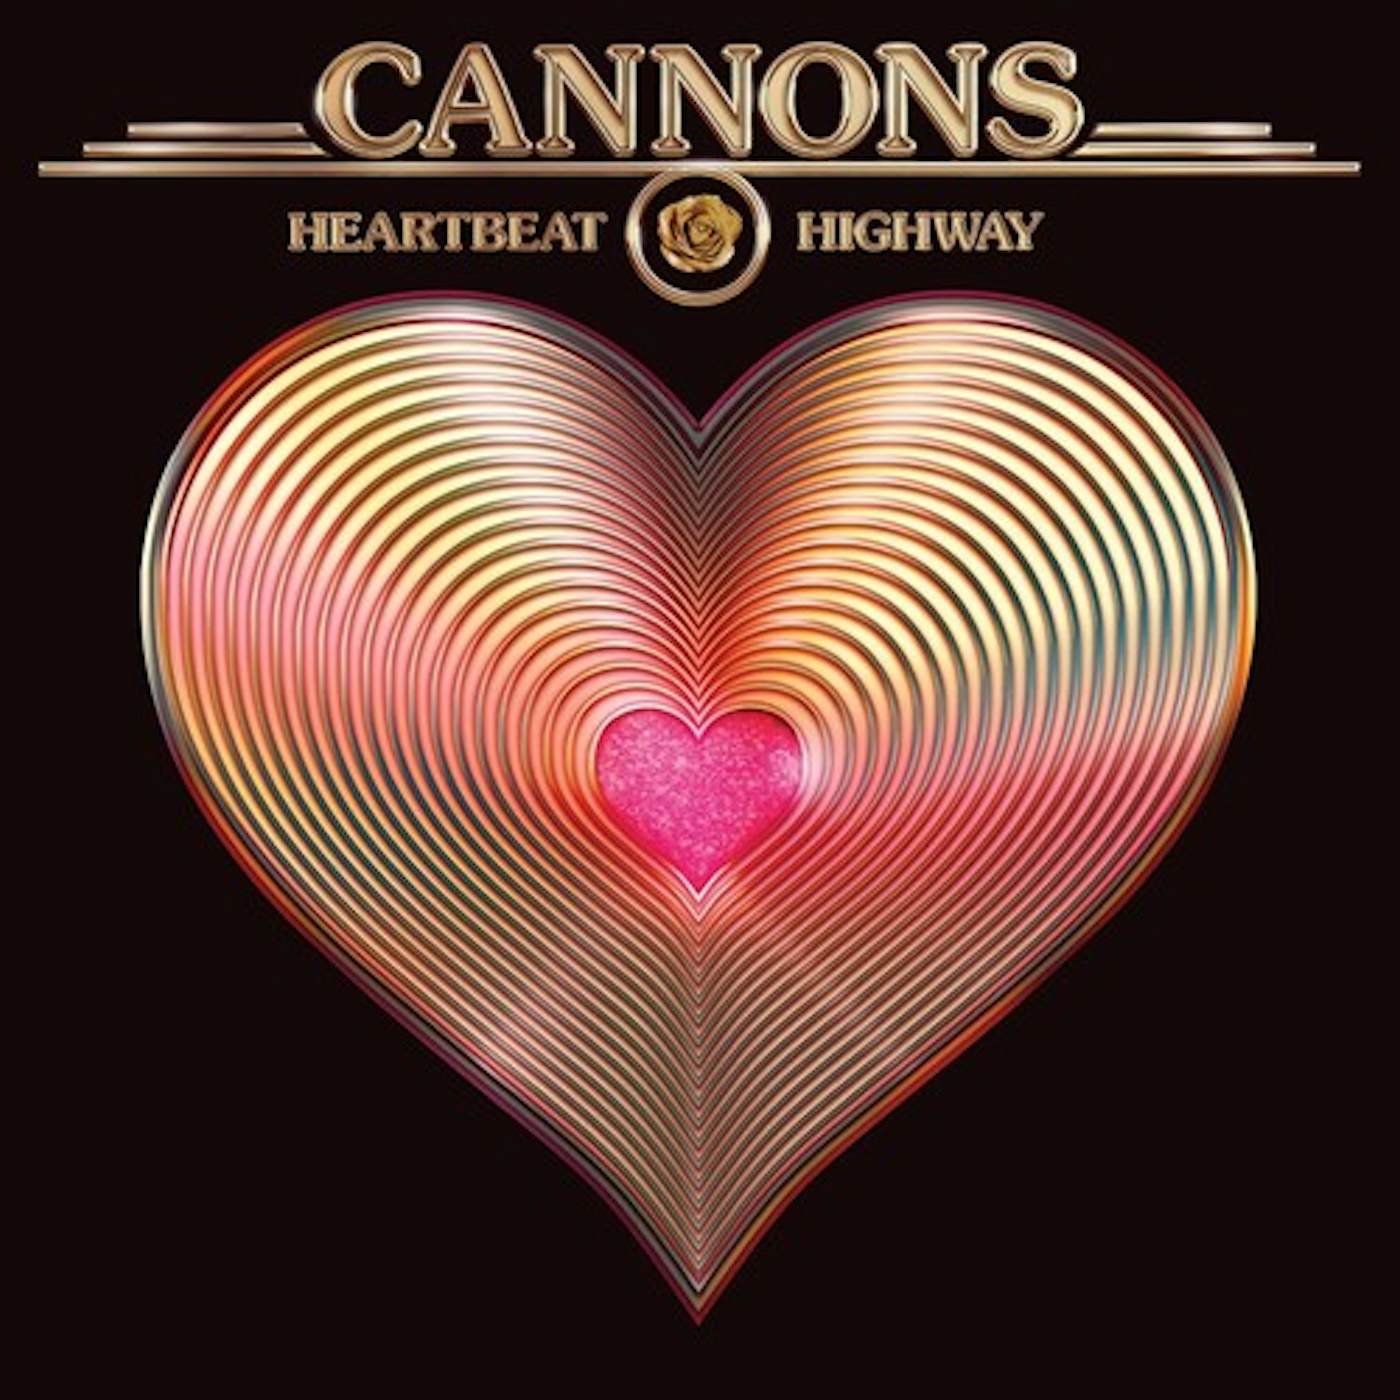 Cannons Heartbeat Highway Vinyl Record